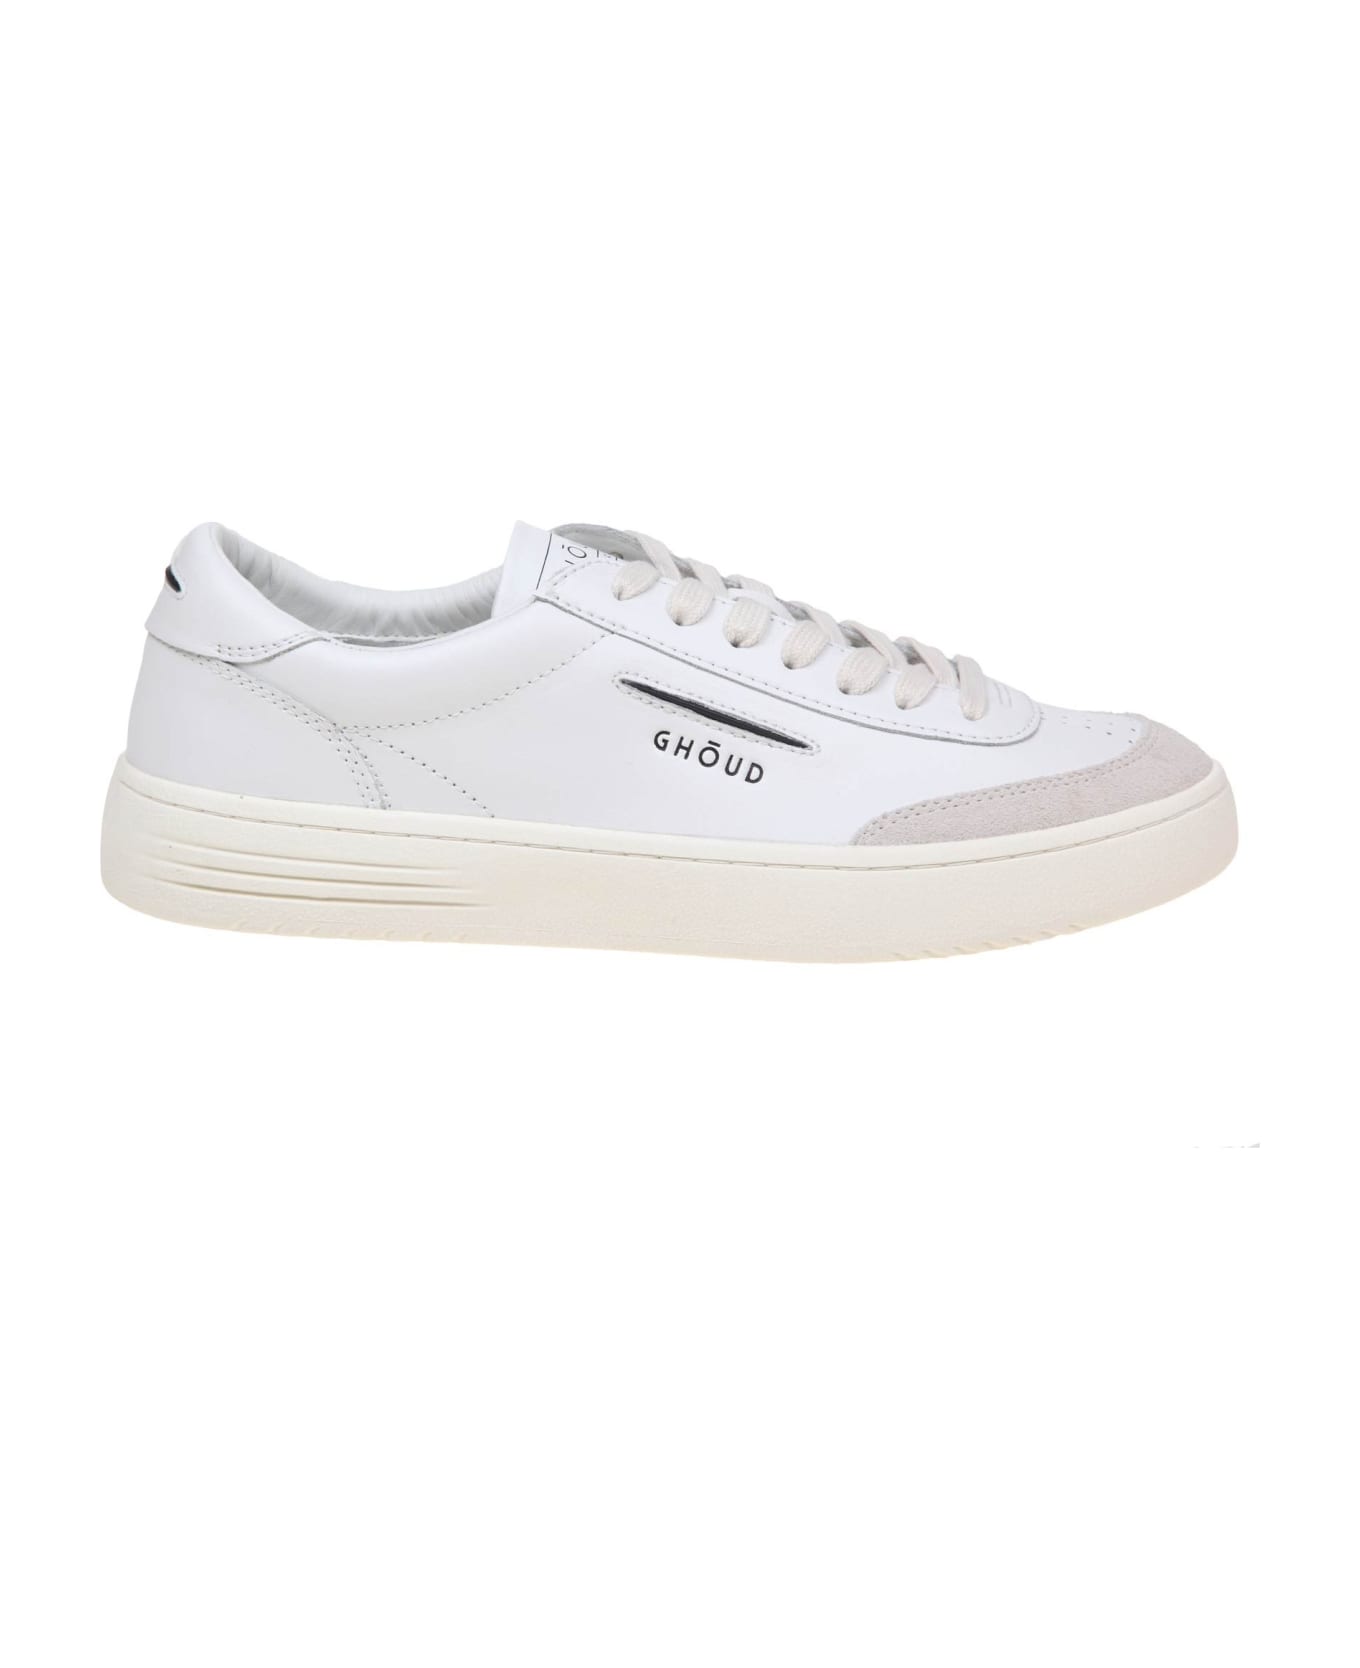 GHOUD Lido Low Sneakers In White Leather And Suede - LEAT/SUEDE WHITE スニーカー